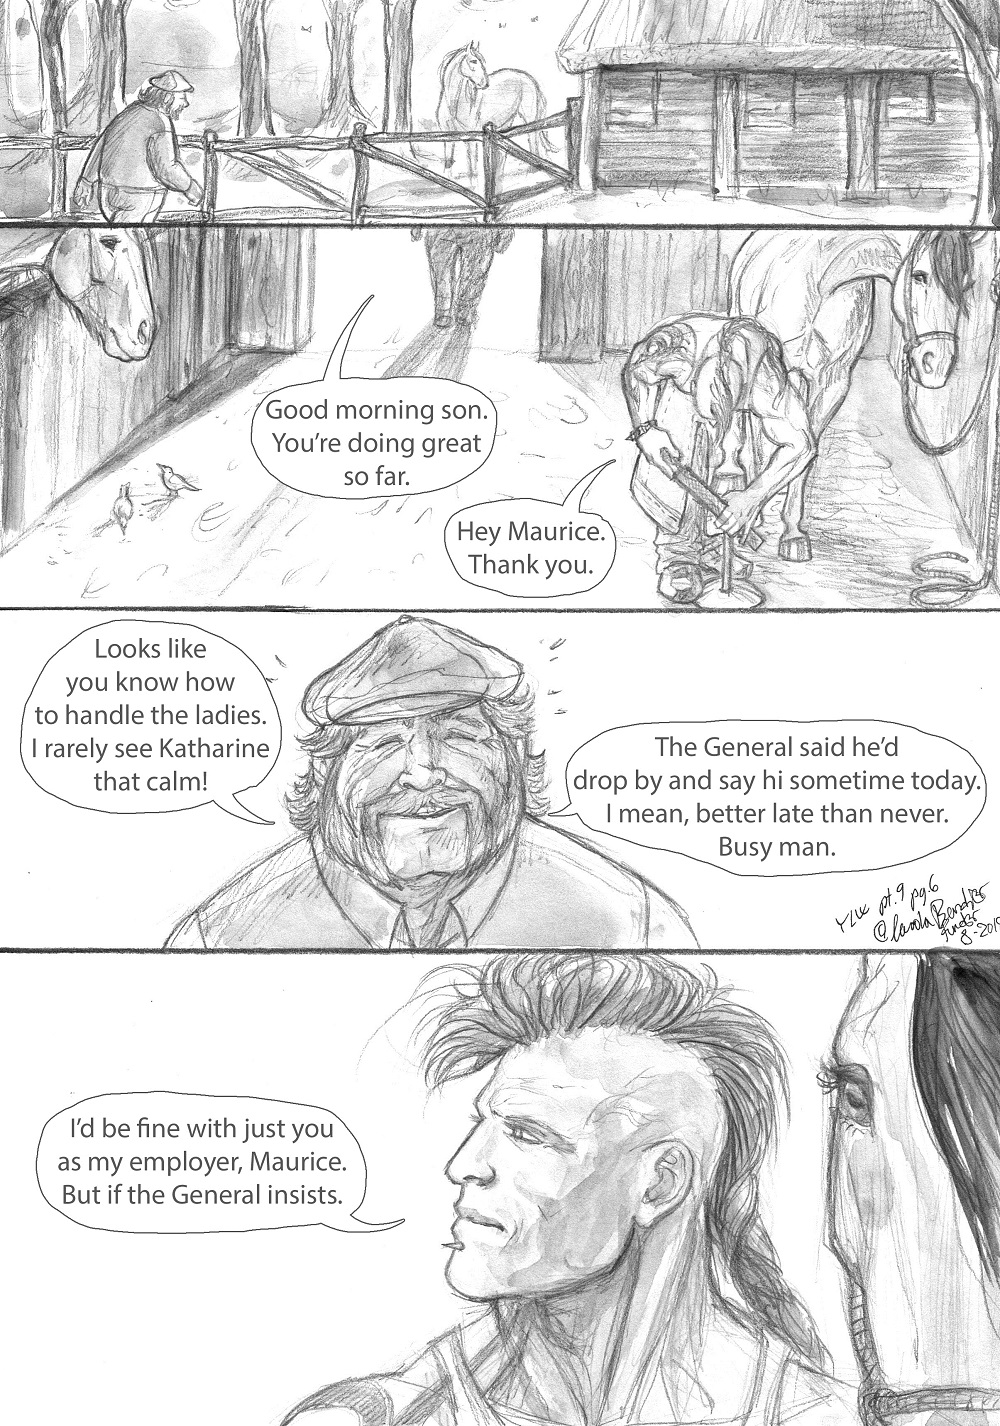 YLW_part9_A_Convenient_Coincidence_page6